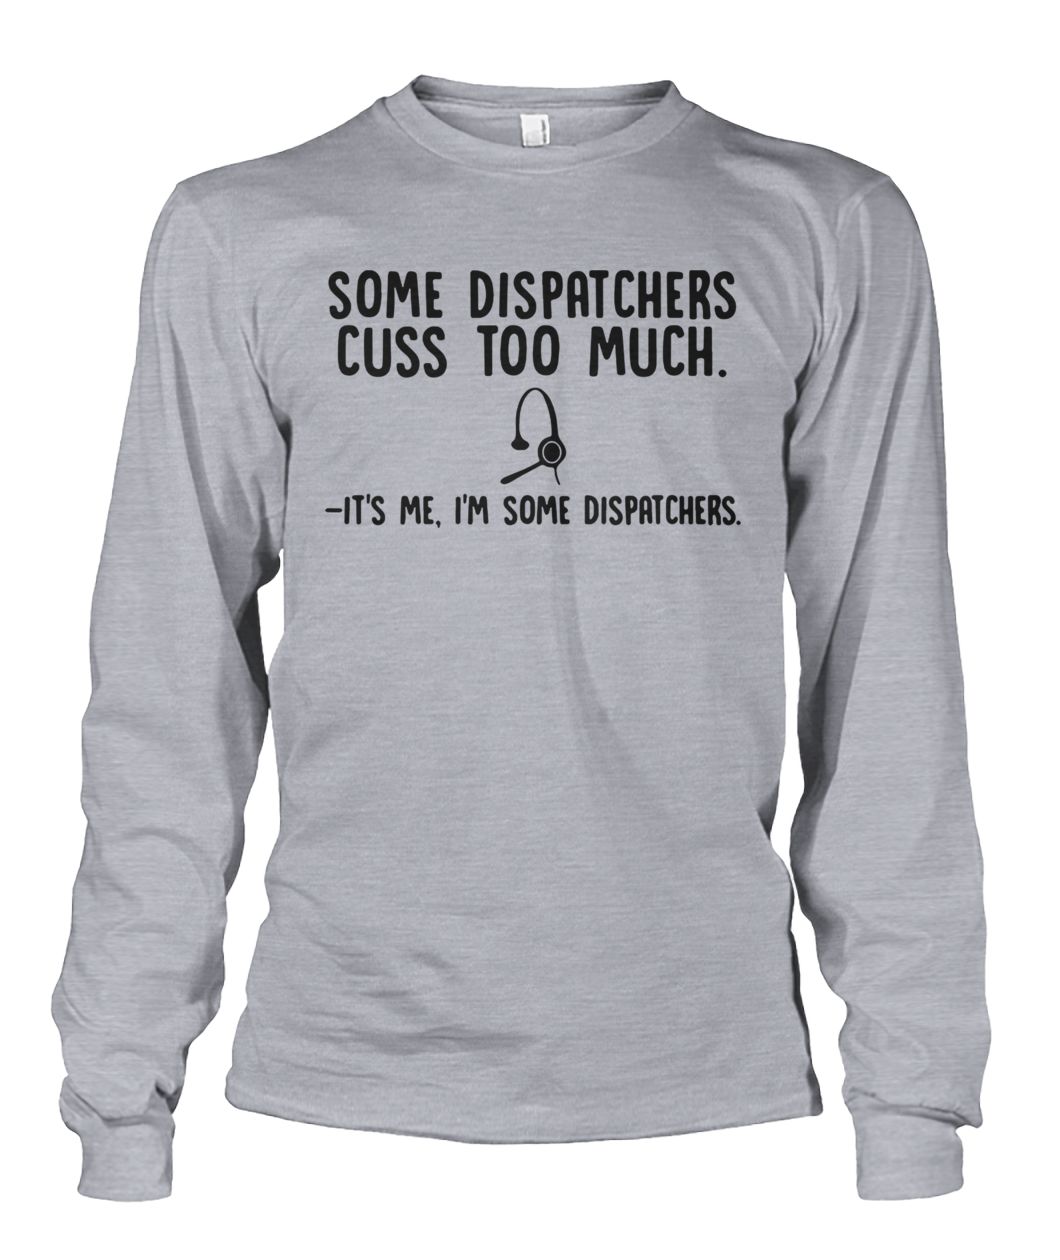 Some dispatchers cuss too much it's me I'm some dispatchers unisex long sleeve